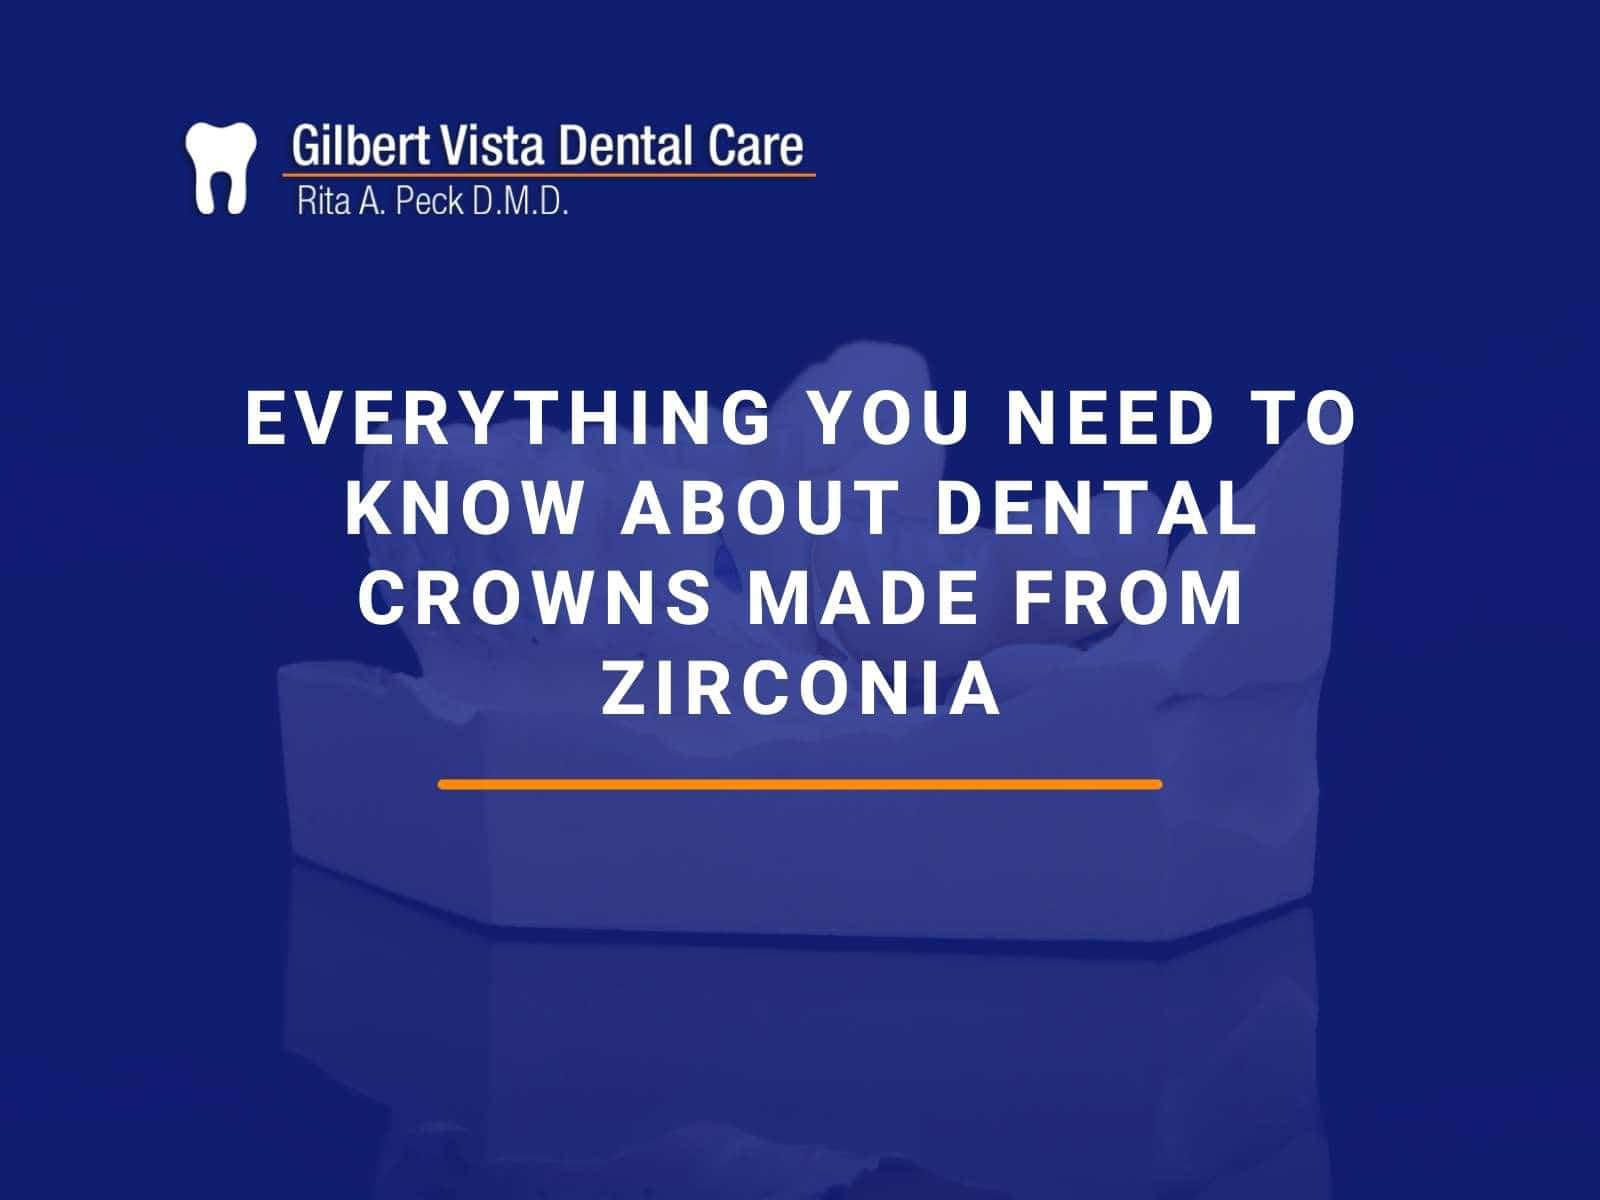 Everything You Need To Know About Dental Crowns Made From Zirconia